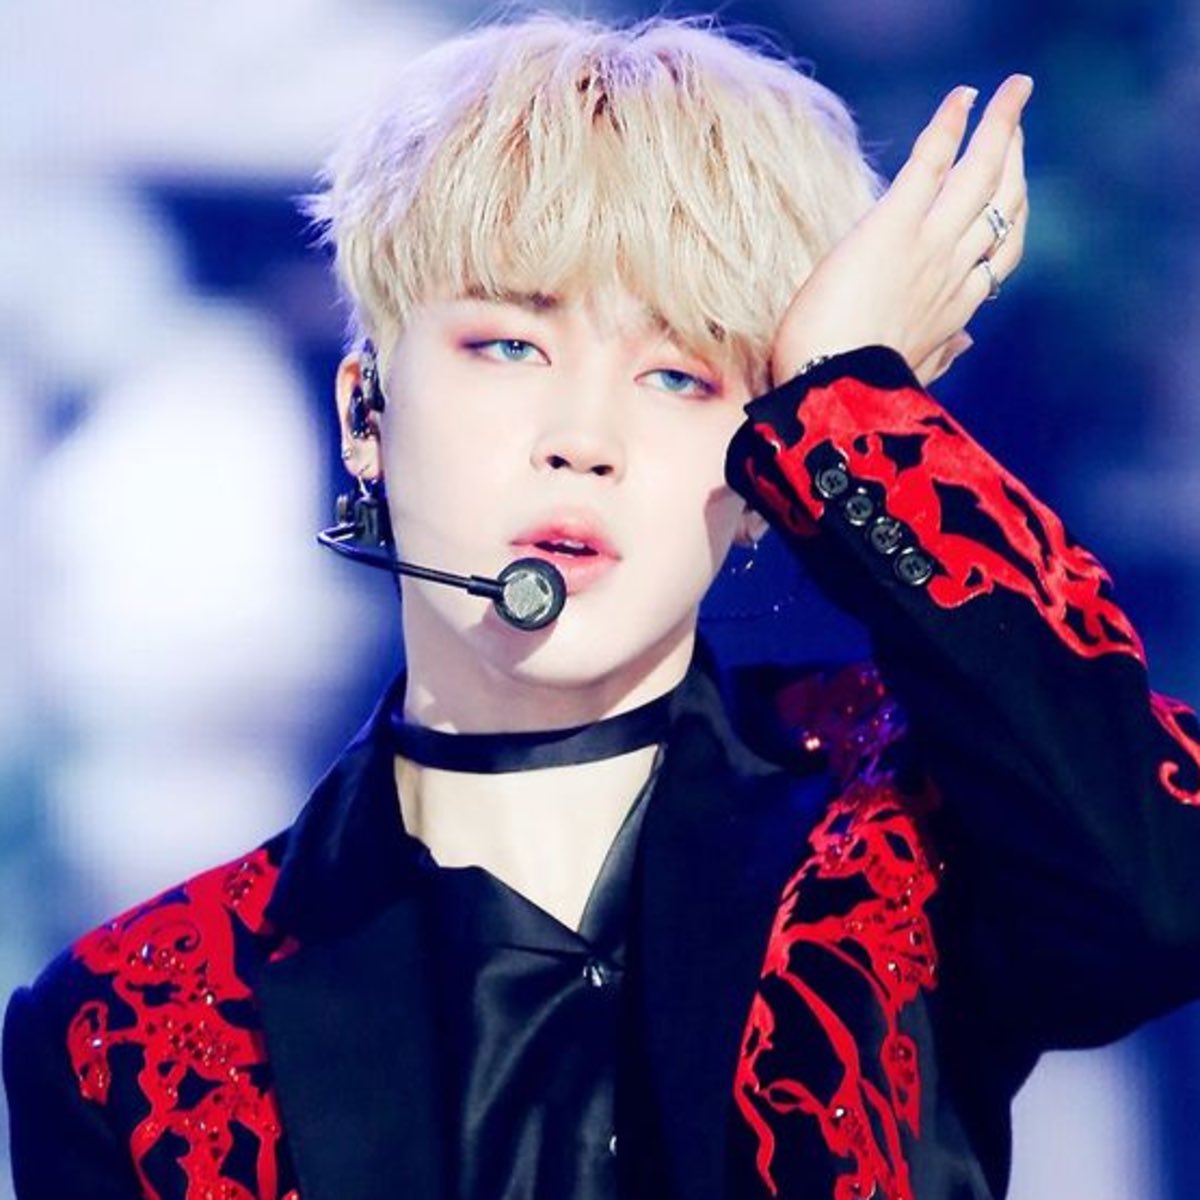 Park Jimin from BTS (25)-dancer, singer, and visual -known for his more feminine look-has been credited by both Korean and international media for “redefining masculinity”-iconic Jimin quote: “what on earth is masculinity?”-Has broken many cultural Korean gender norms